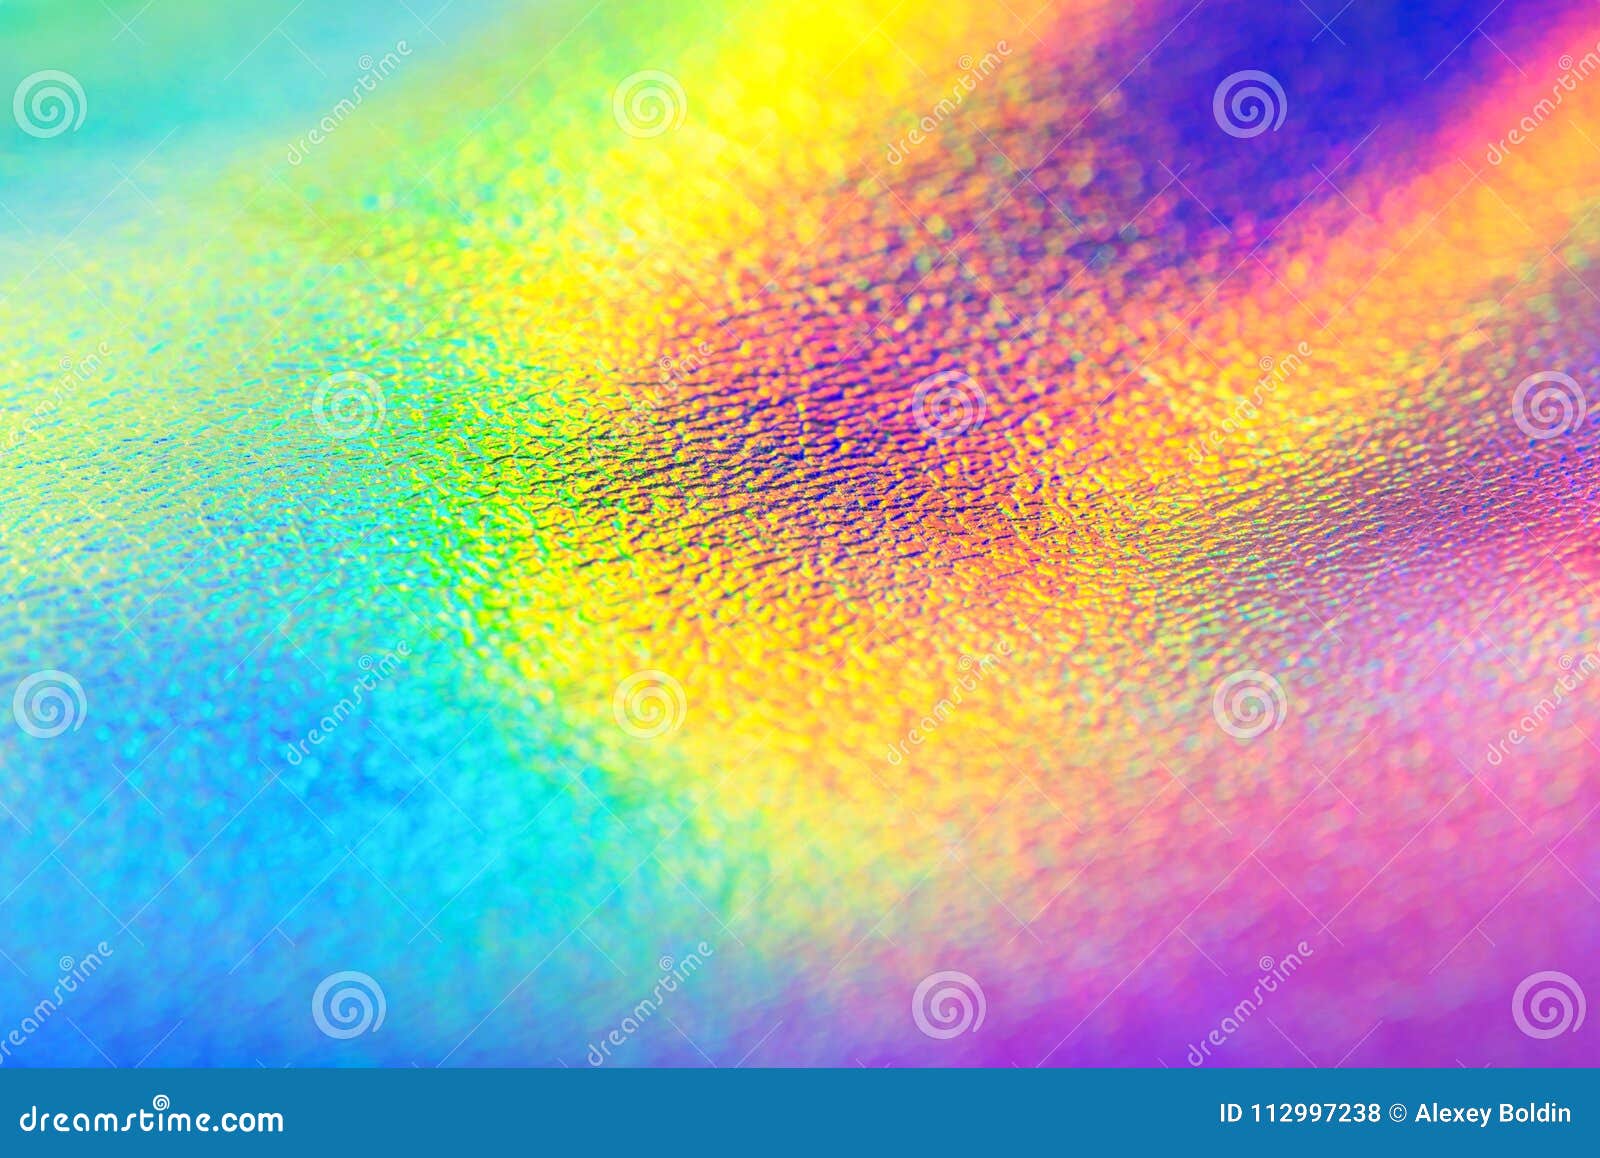 rainbow real holographic foil texture background